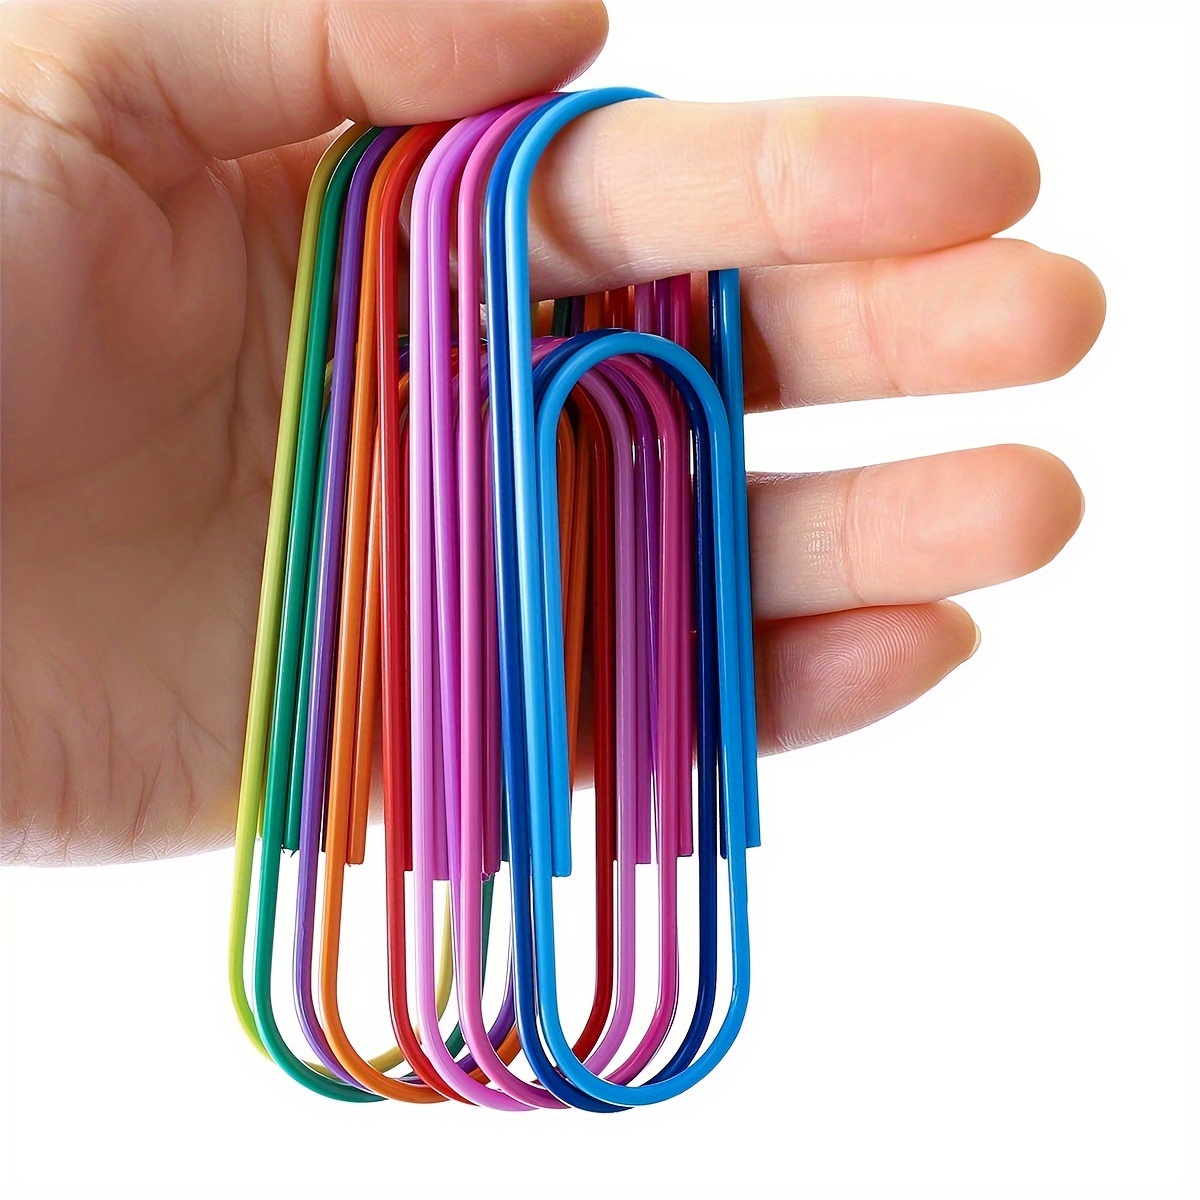 

160pcs/box Extra Large Colorful Jumbo Coated Paper Clips - 29mm Paper Clips For Office And School Document Organization